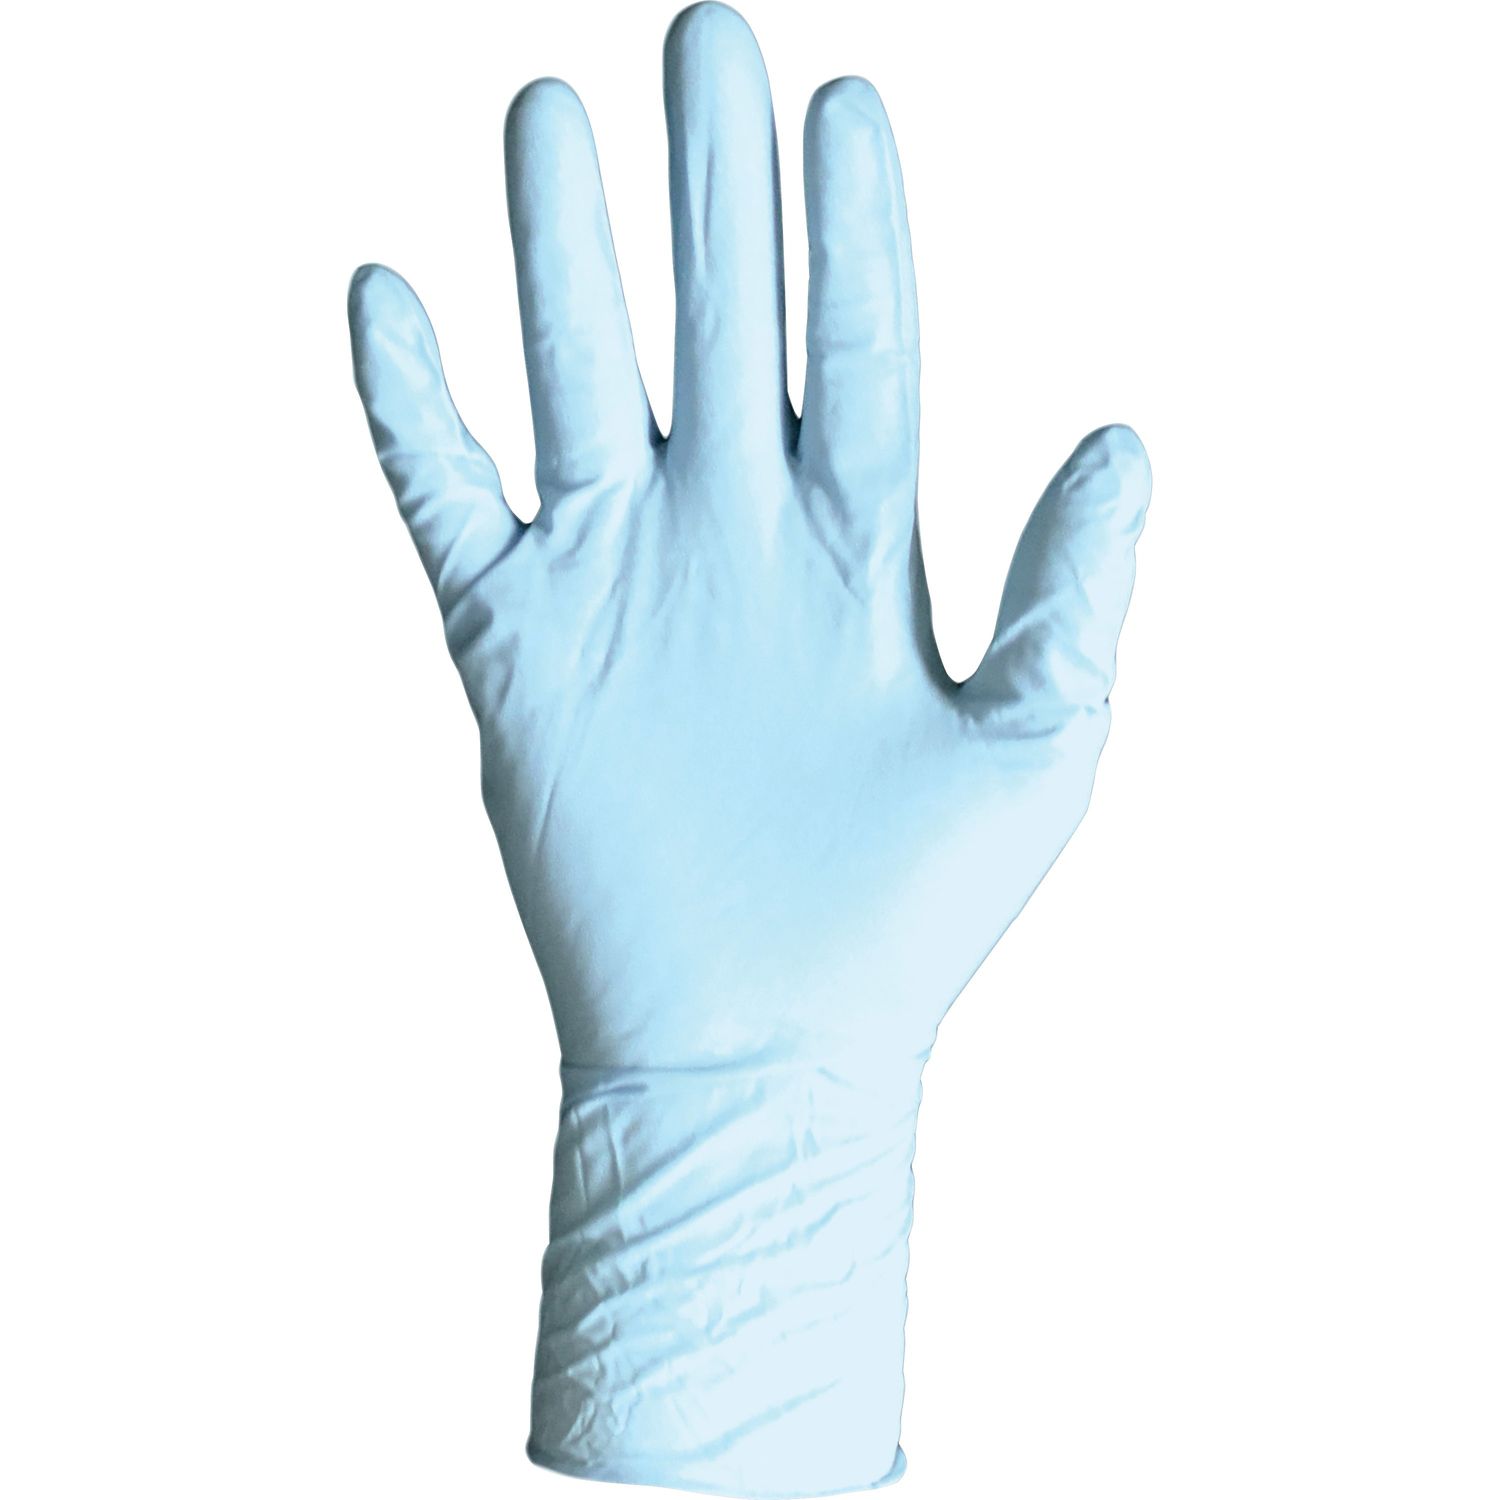 8 mil Disposable Powder-free Nitrile Exam Gloves XXL Size, Nitrile, Blue, Disposable, Powder-free, Ambidextrous, Beaded Cuff, Puncture Resistant, Textured Grip, Chemical Resistant